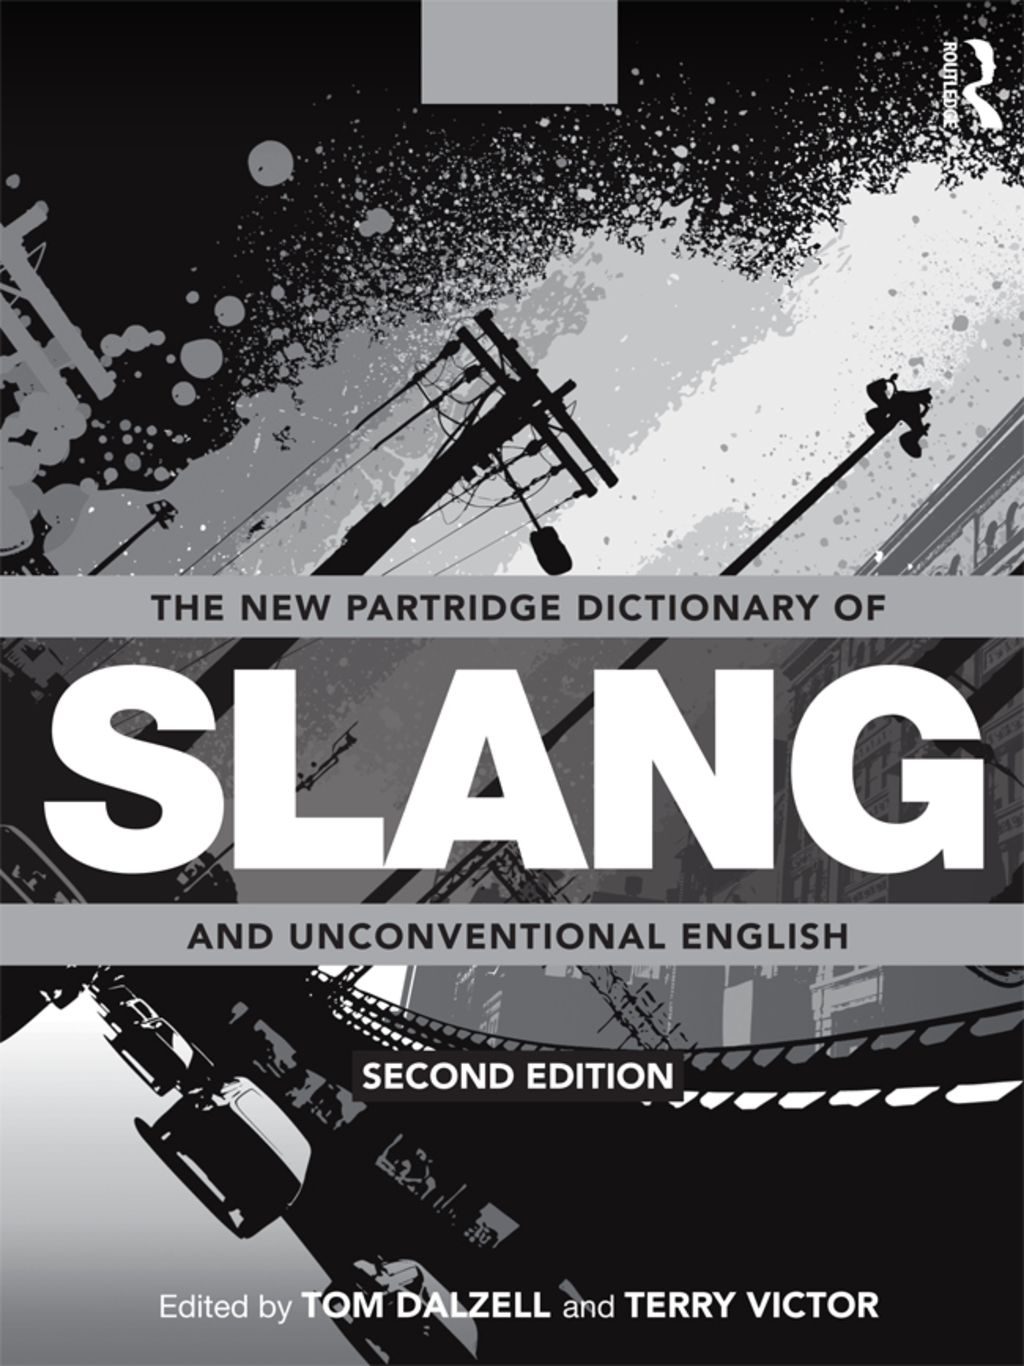 The New Partridge Dictionary of Slang and Unconventional English - 2nd Edition (eBook Rental)